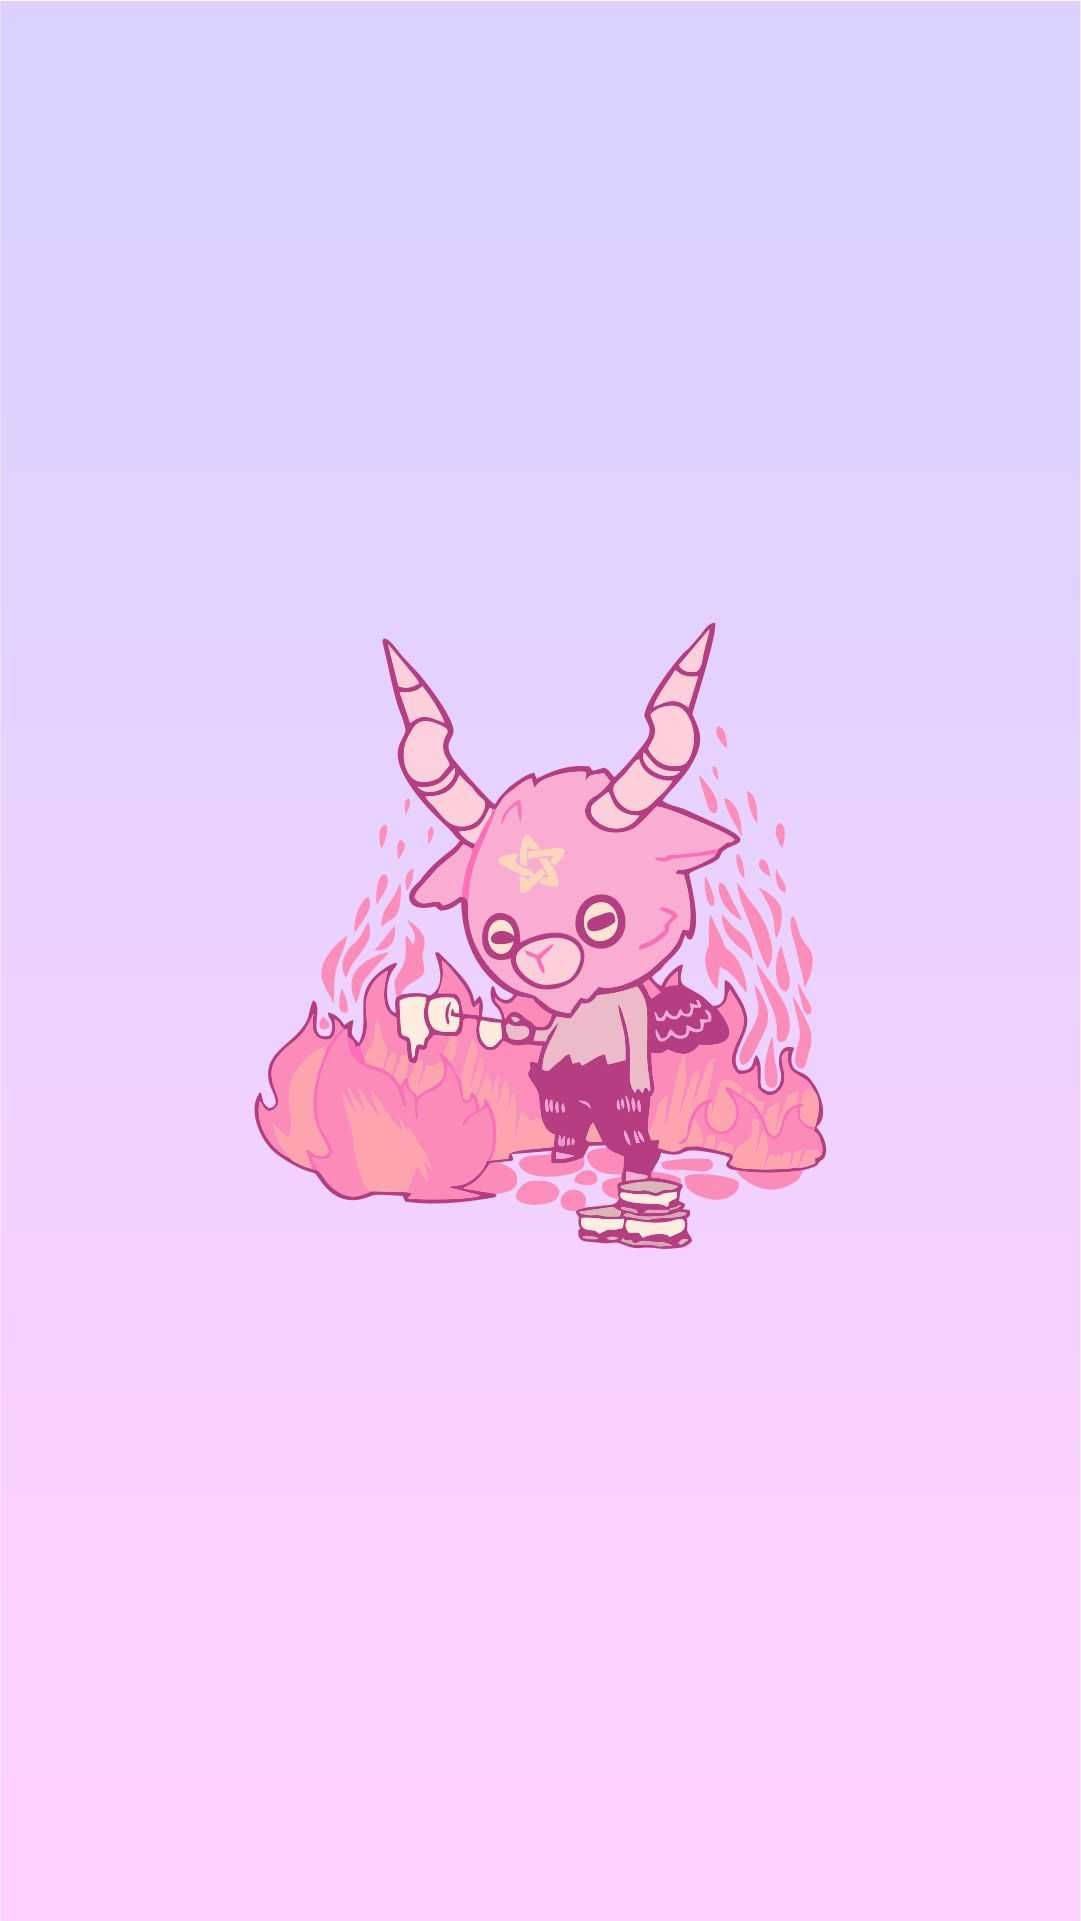 A cute pink goat with horns and a star on its forehead is holding a pink heart - Gothic